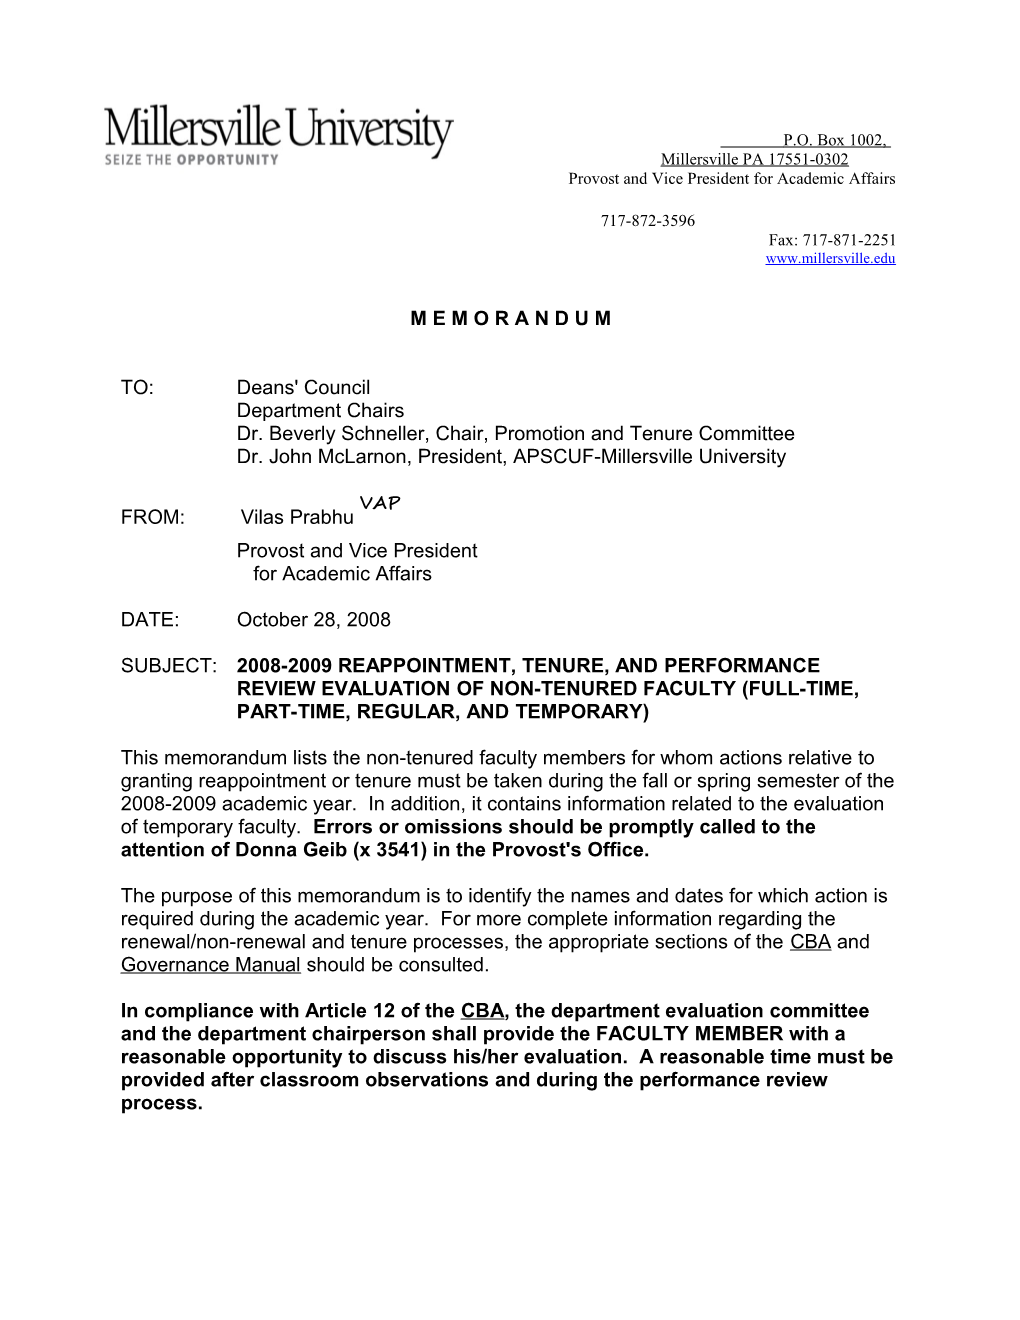 Memorandum 2008-2009 Reappointment, Tenure and Performance Review of Non-Tenured Faculty